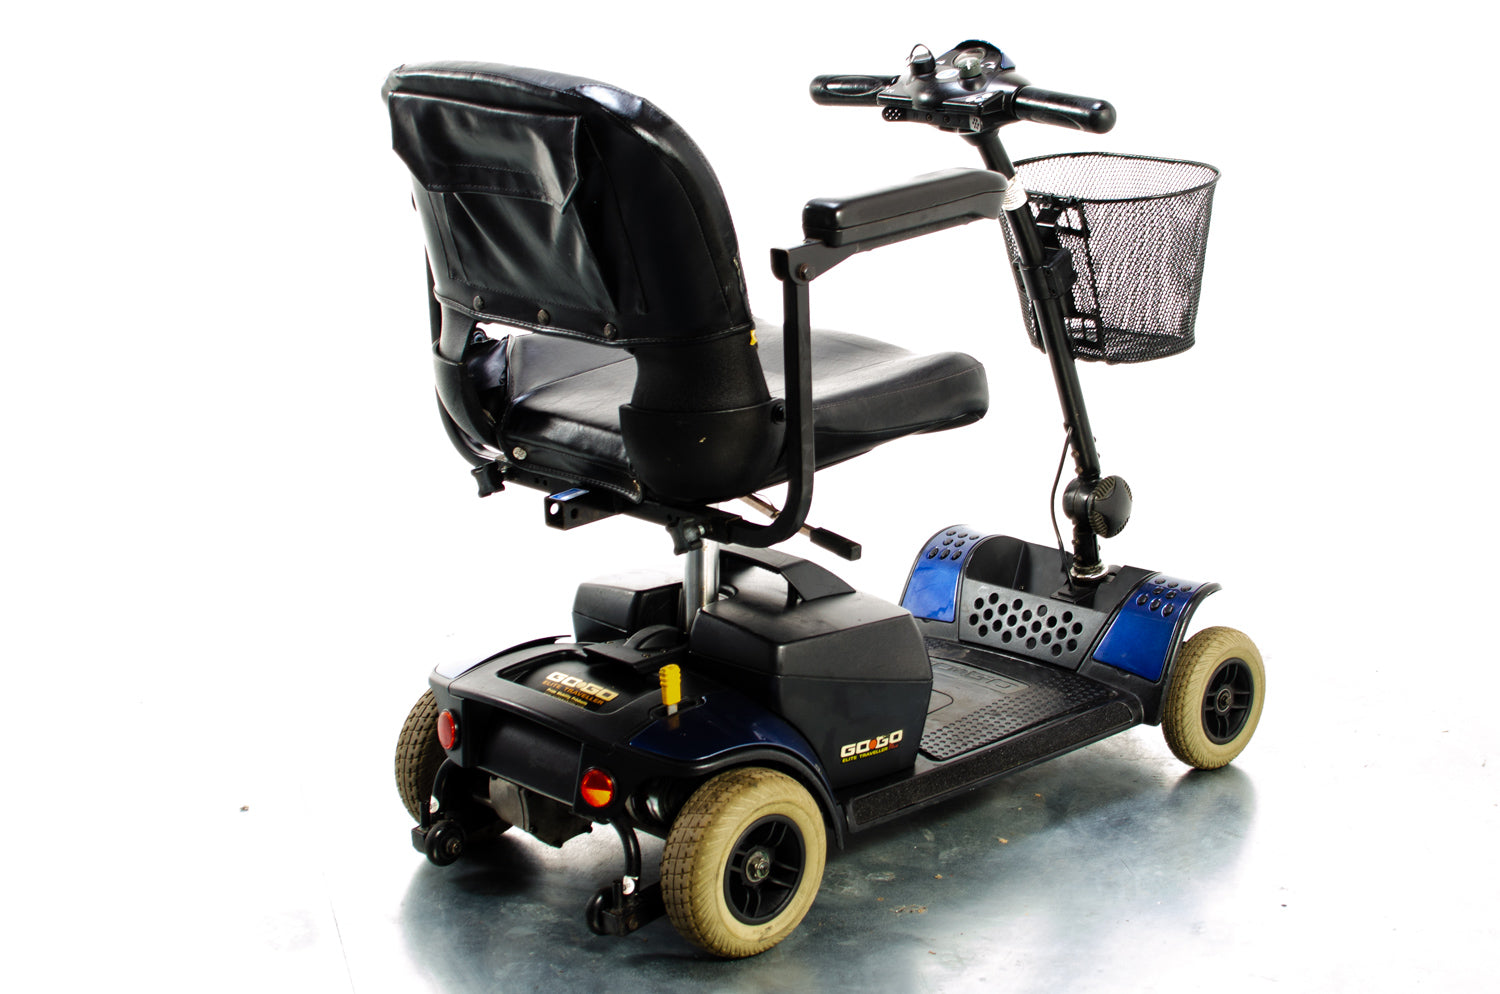 Pride Go-Go Elite Traveller Plus Used Mobility Scooter Small Transportable Lightweight Travel Car